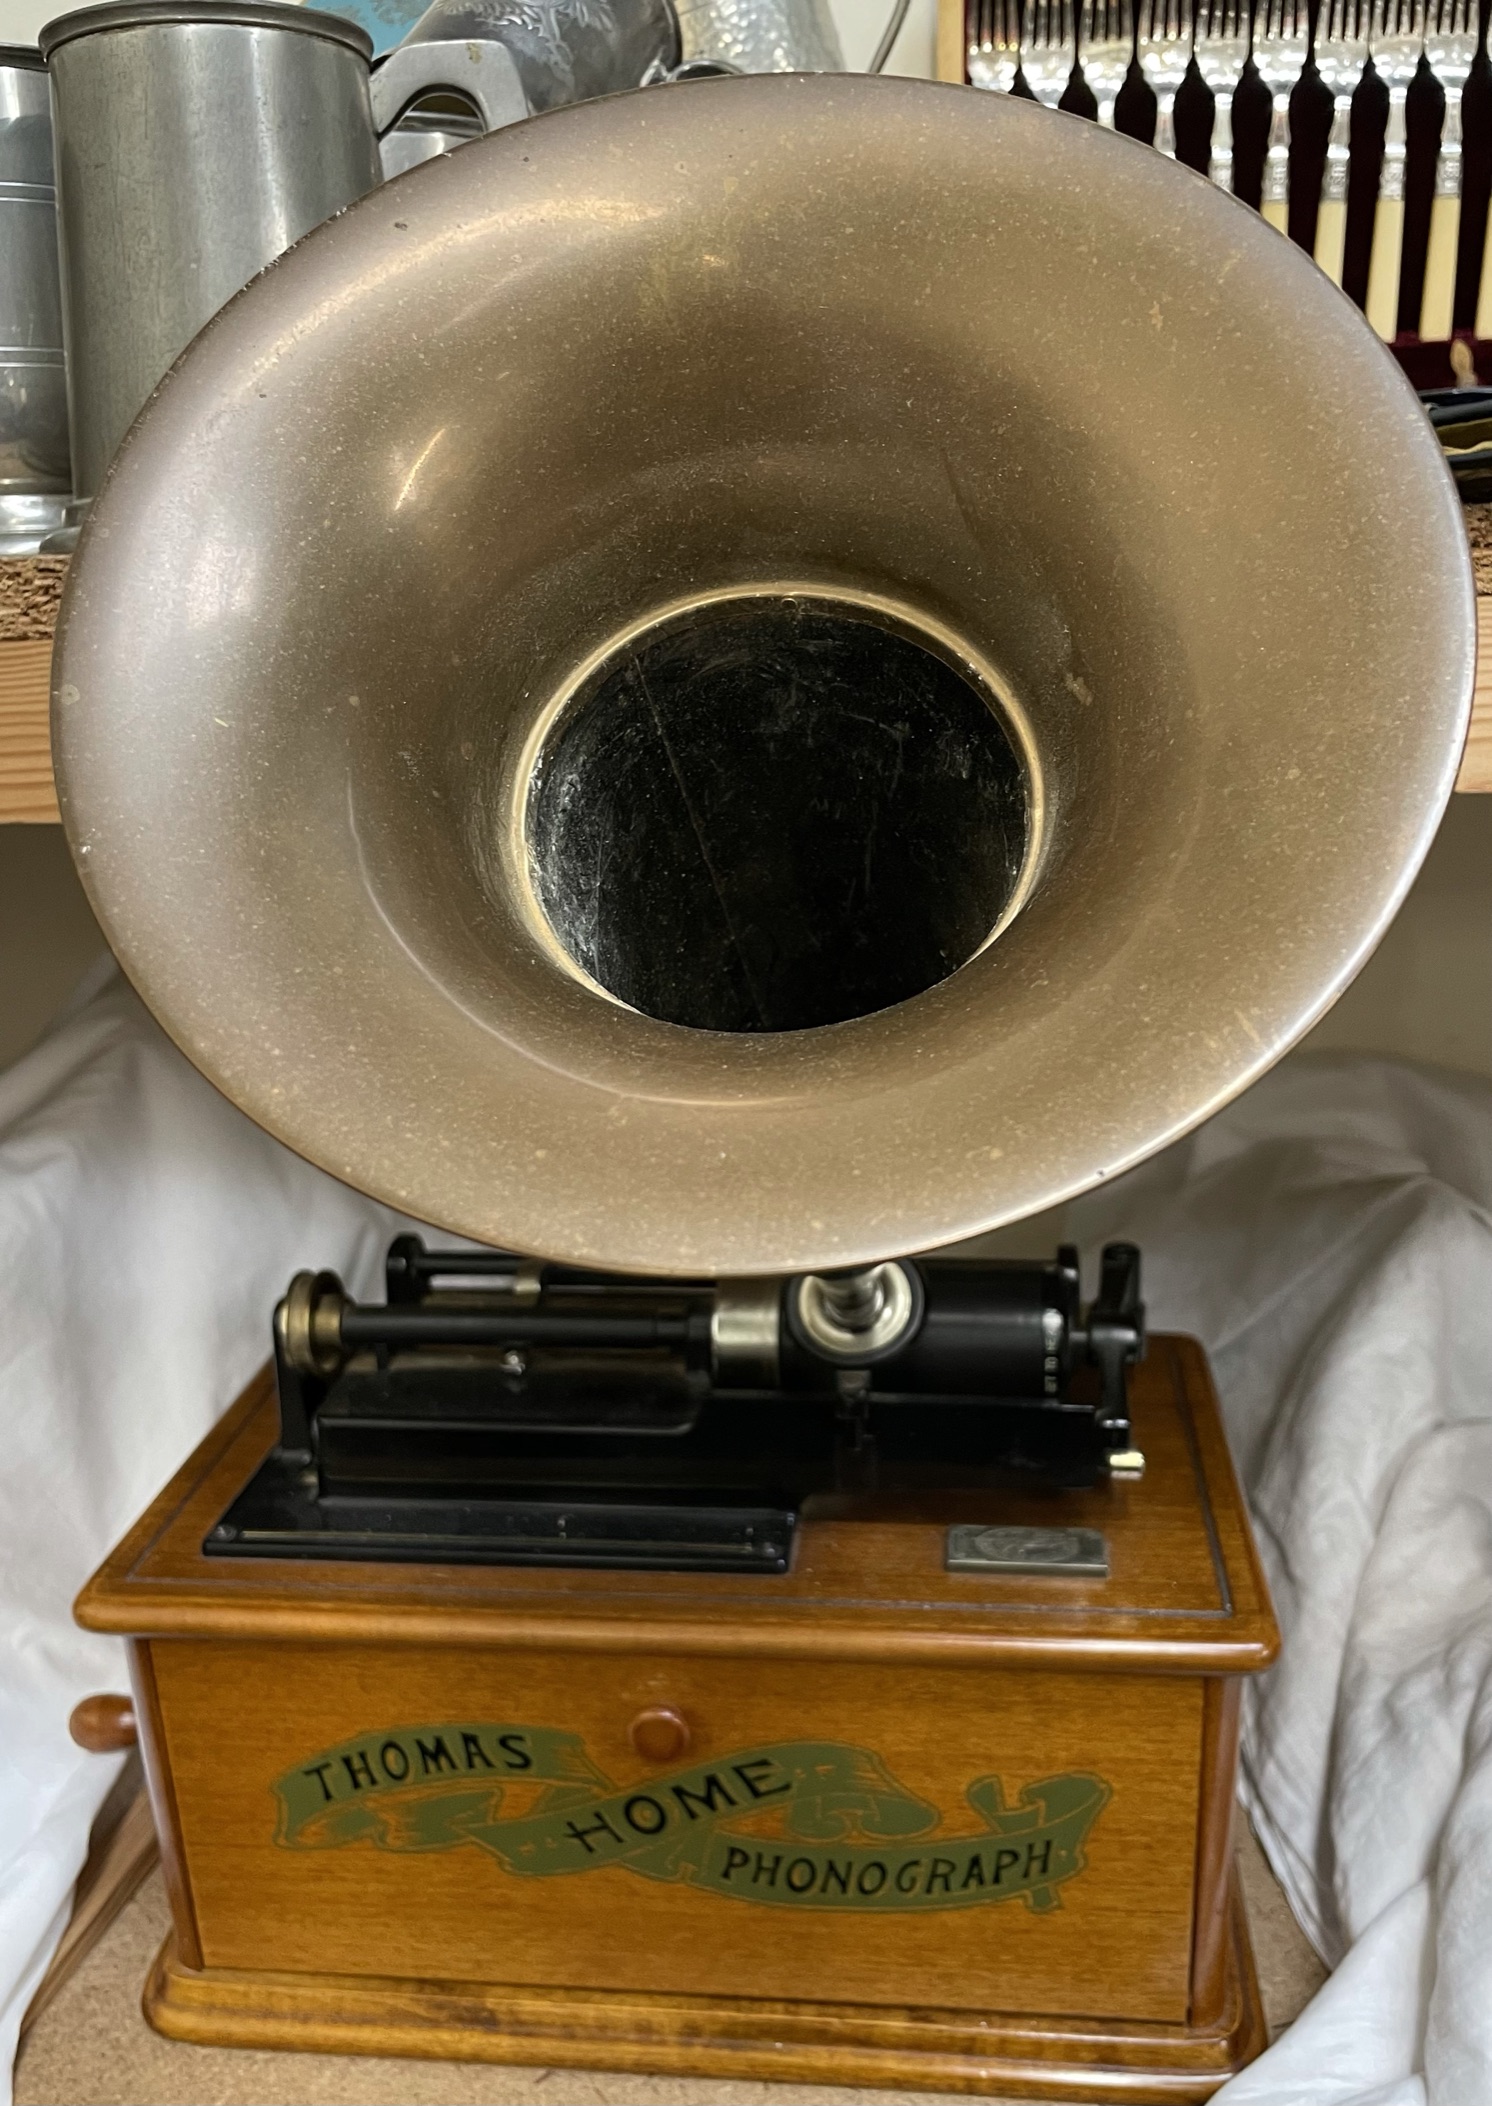 A Spirit of St Louis "Thomas Home Phonograph", - Image 3 of 3